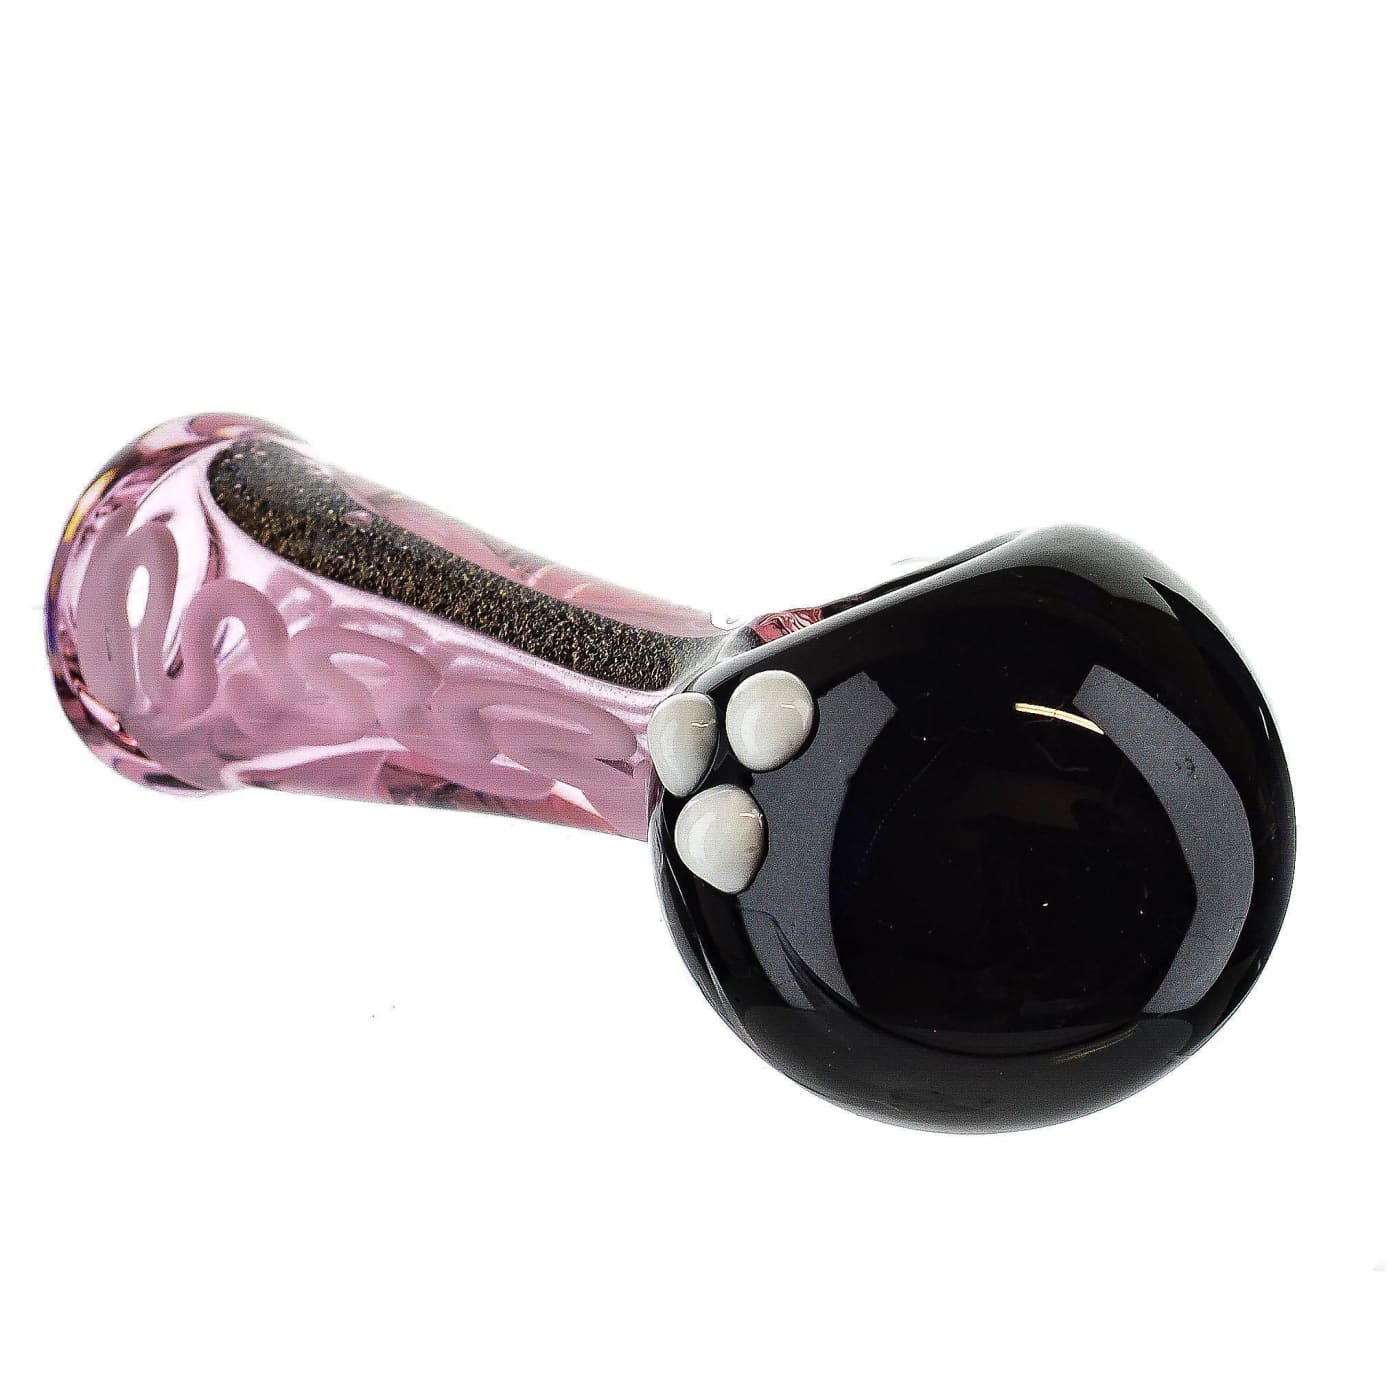 Dichroic Ebony and Pink Glass Spoon